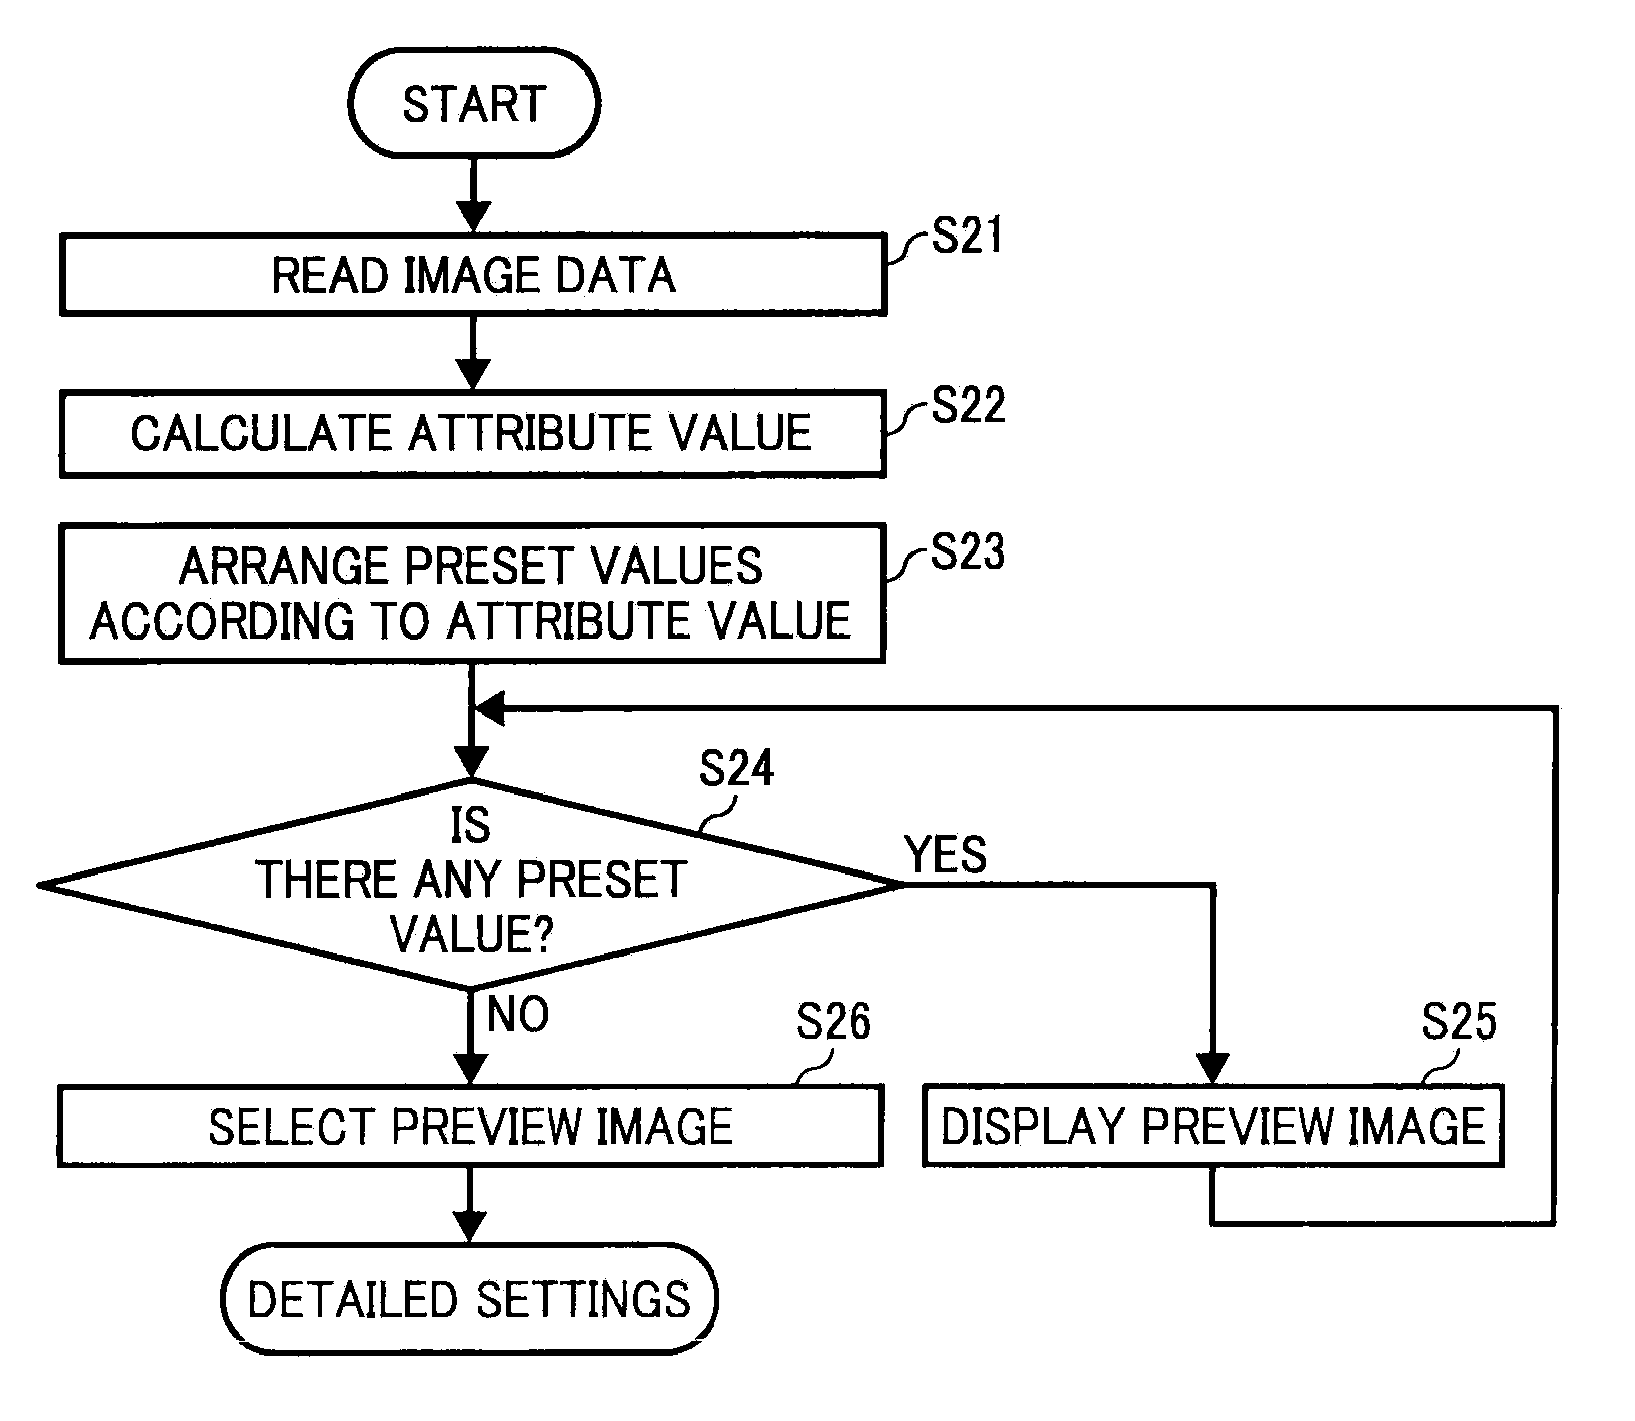 Image processing apparatus, image forming apparatus, and computer program product